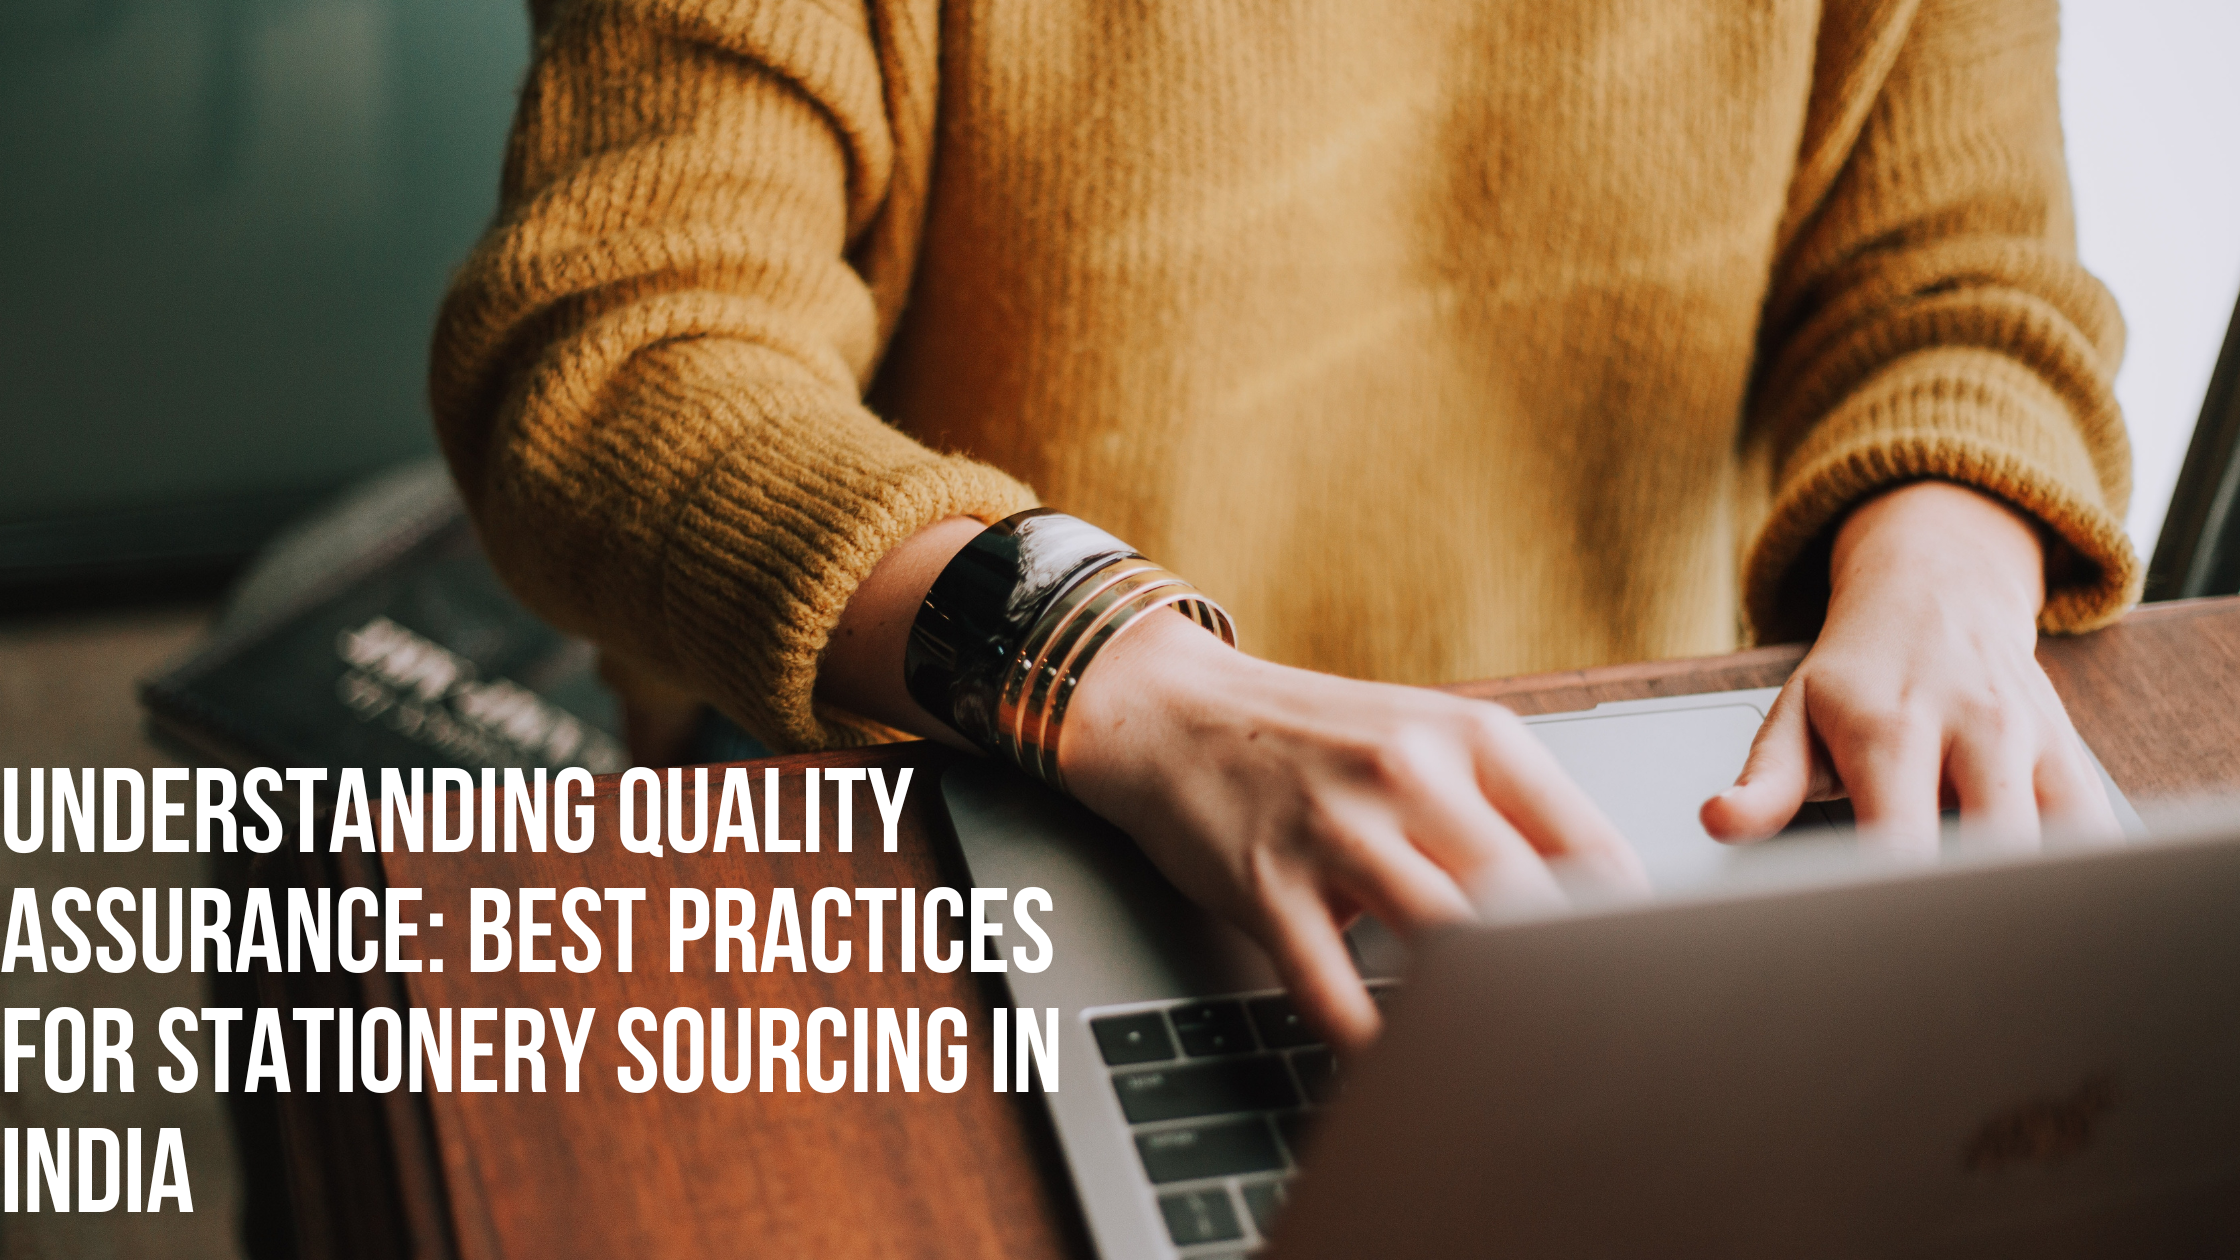 Understanding Quality Assurance: Best Practices for Stationery Sourcing